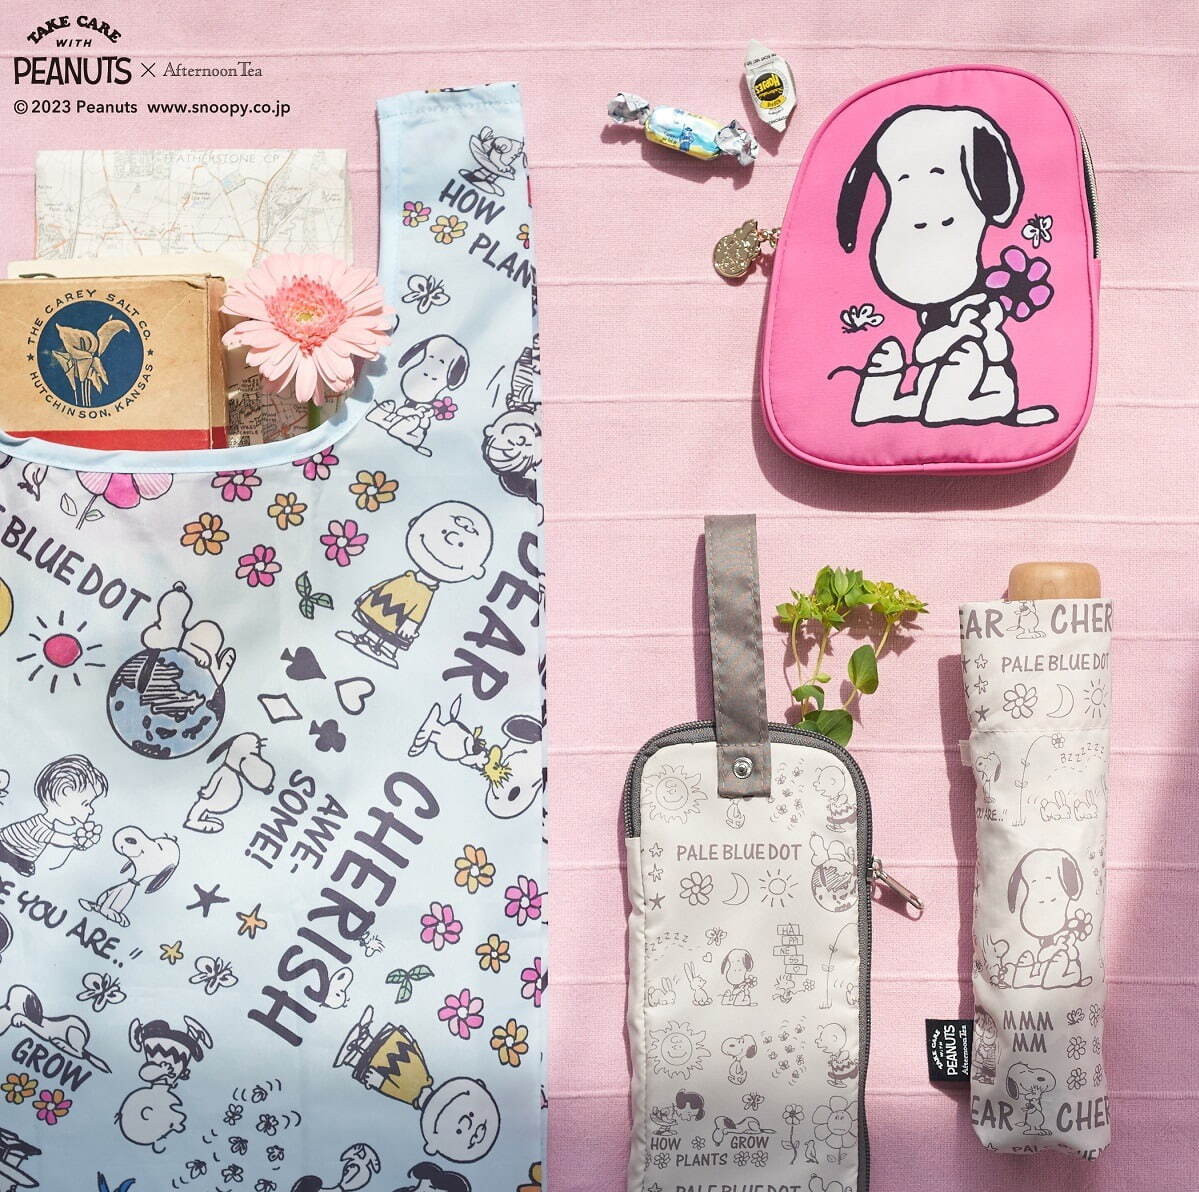 【Order】Afternoon Tea LIVING x「TAKE CARE WITH PEANUTS」Eco bag / Pouch / Foldable Umbrella / Umbrella storage case